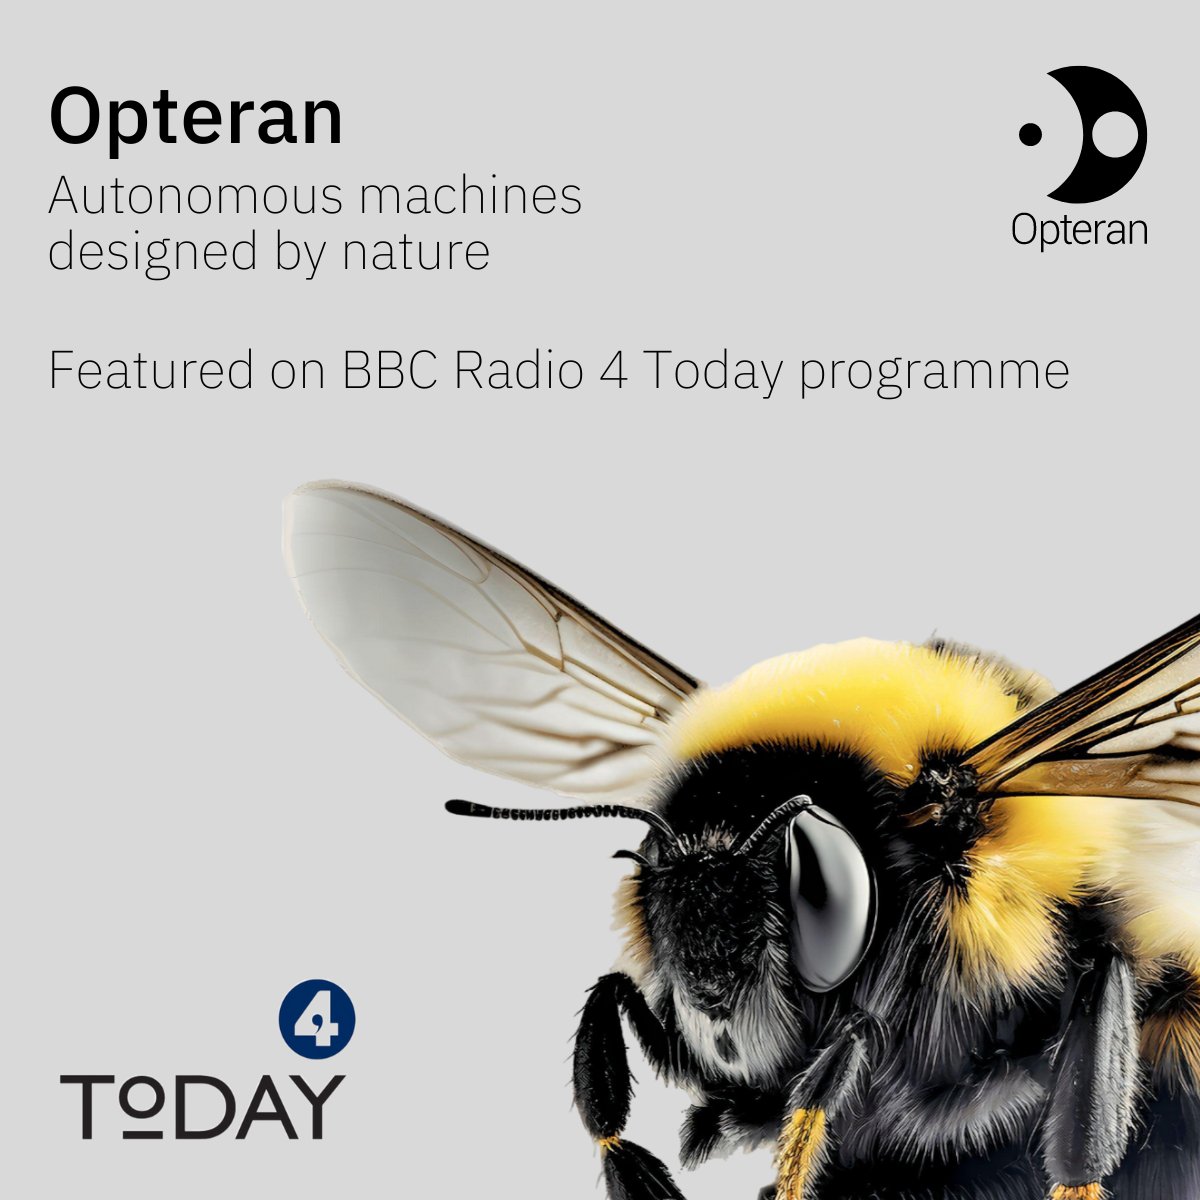 @opterantech Chief Scientific Officer & co-founder Prof. James Marshall on @BBCr4today programme talking about his research with Dr. HaDi MaBouDi and Prof. Andrew Barron on the decision making of bees. bbc.co.uk/sounds/play/m0… (scan to 1:25:36)#robotics #naturalintelligence #AI